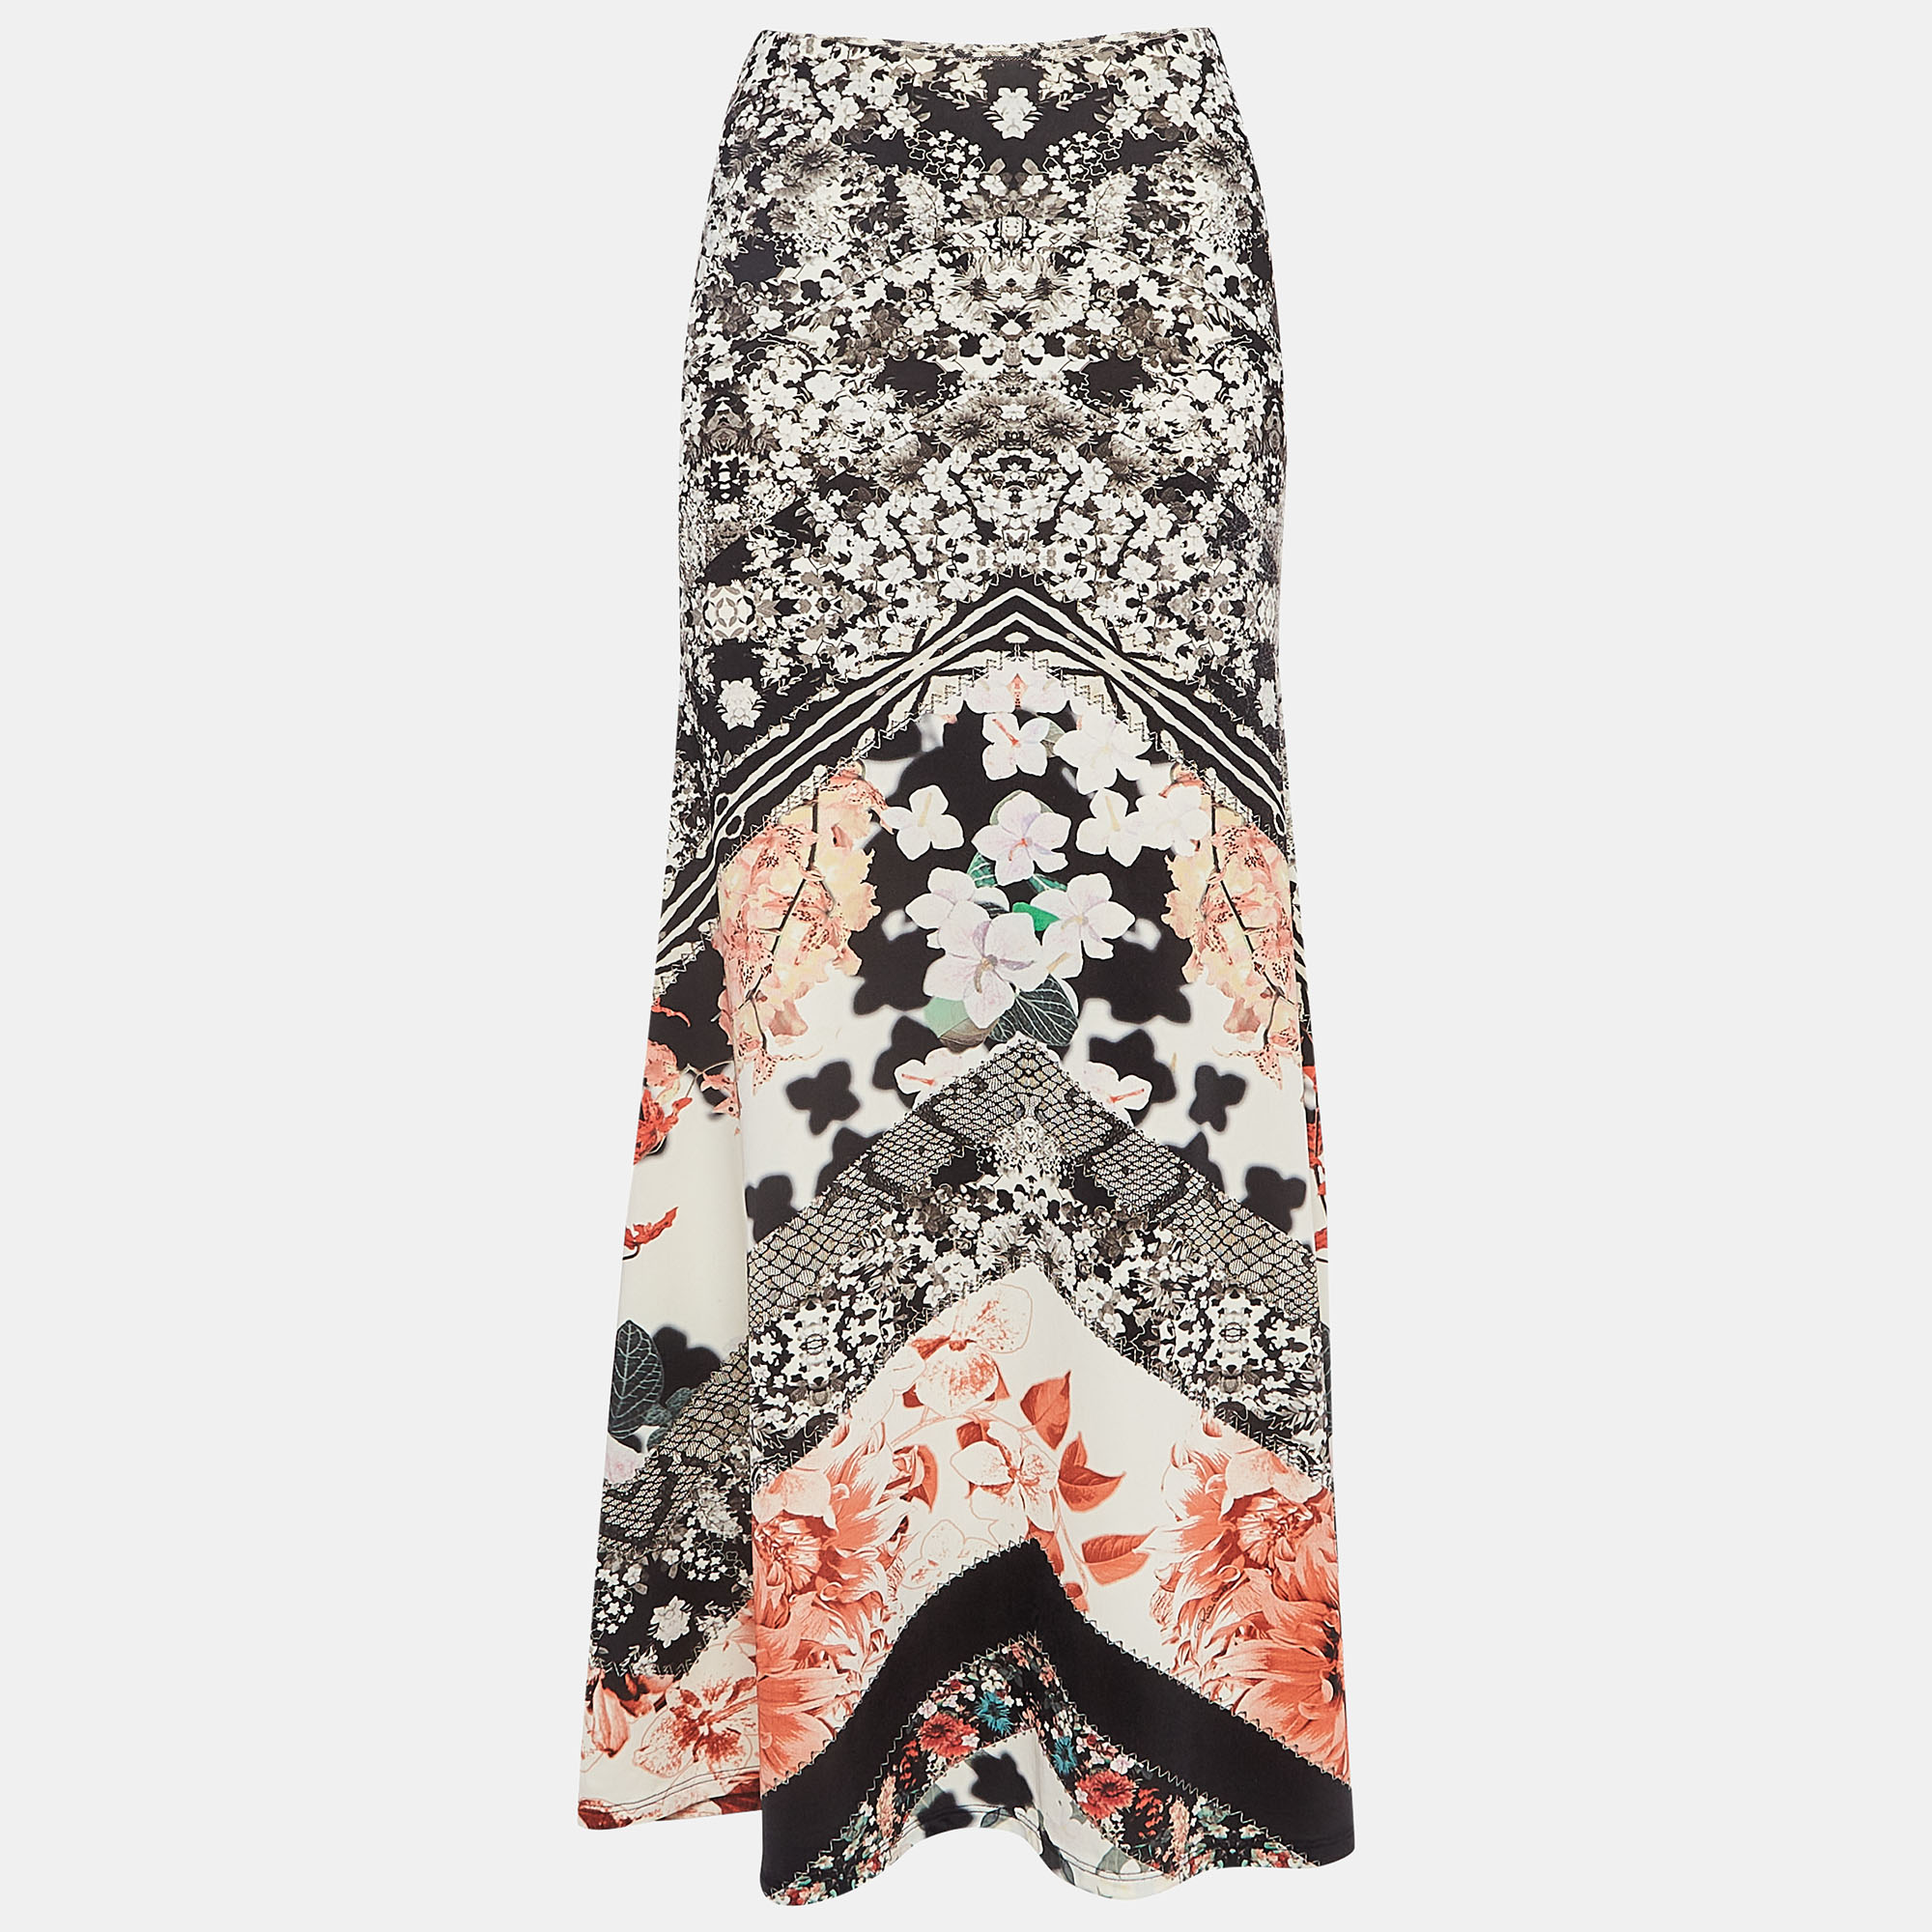 Roberto cavalli multicolor floral print jersey flared maxi skirt s